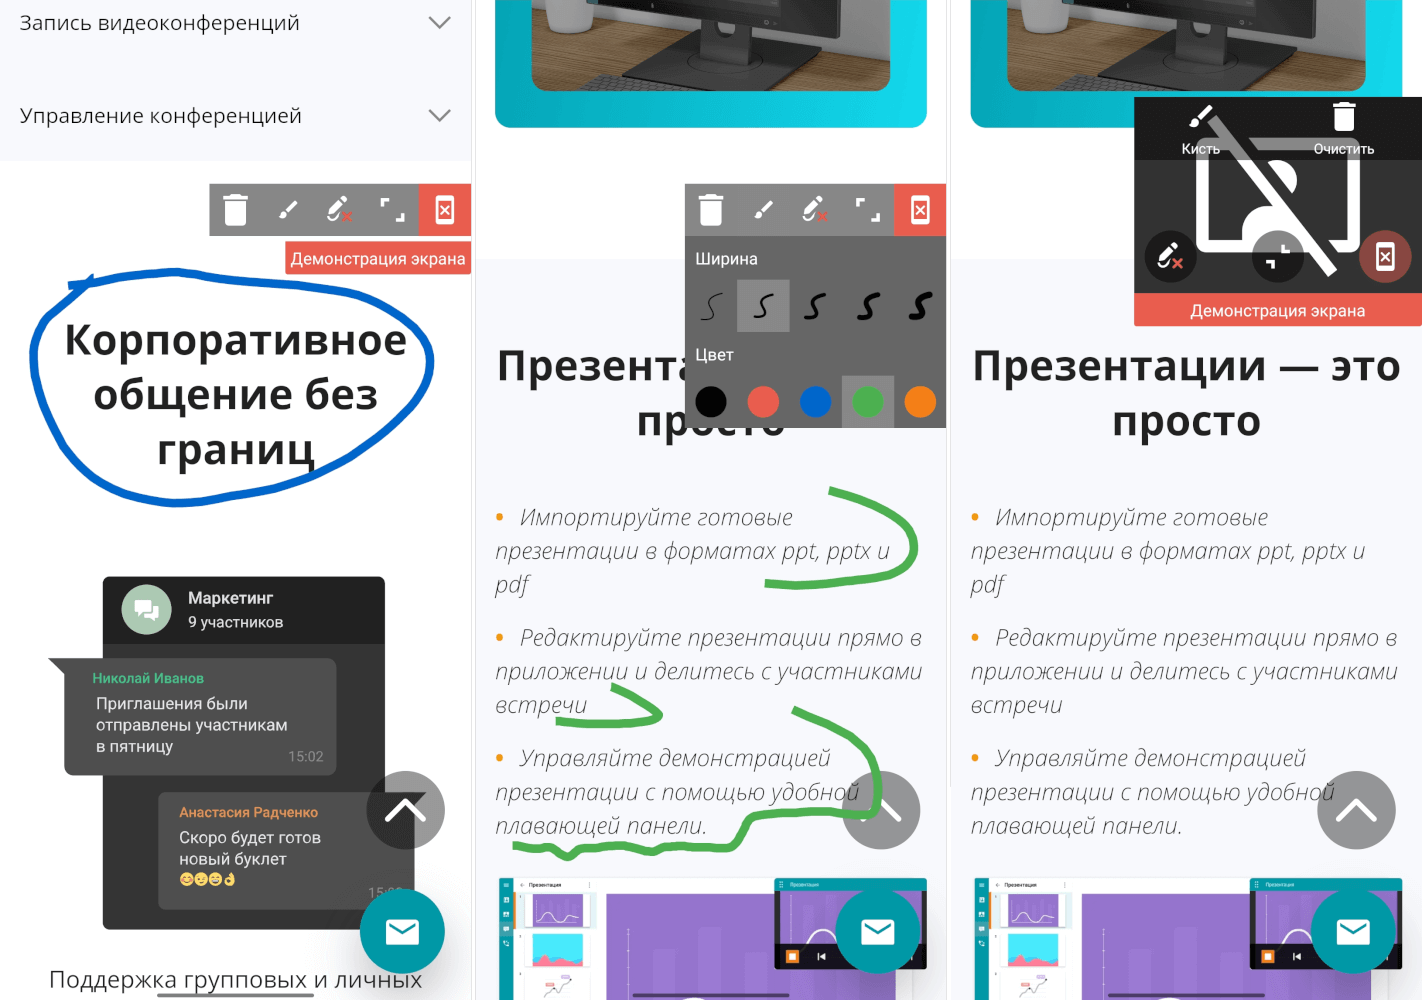 /client-android/media/share_widget_draw_example/ru.png